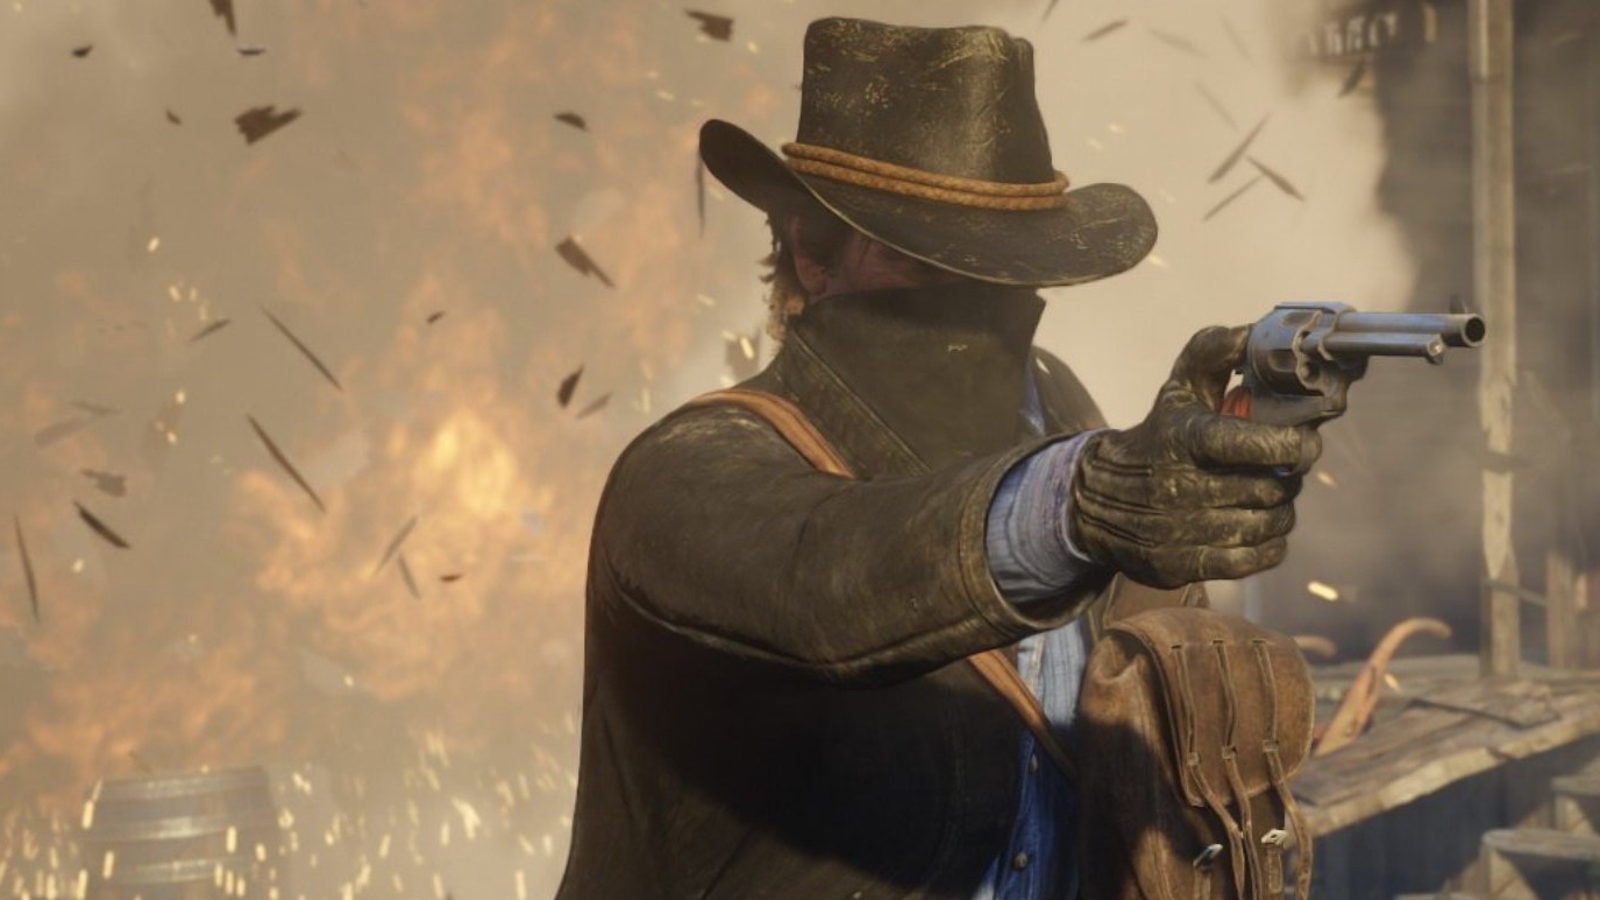 Red Dead Redemption 2 PC Tech Analysis, Comparison With PS4 Pro And More